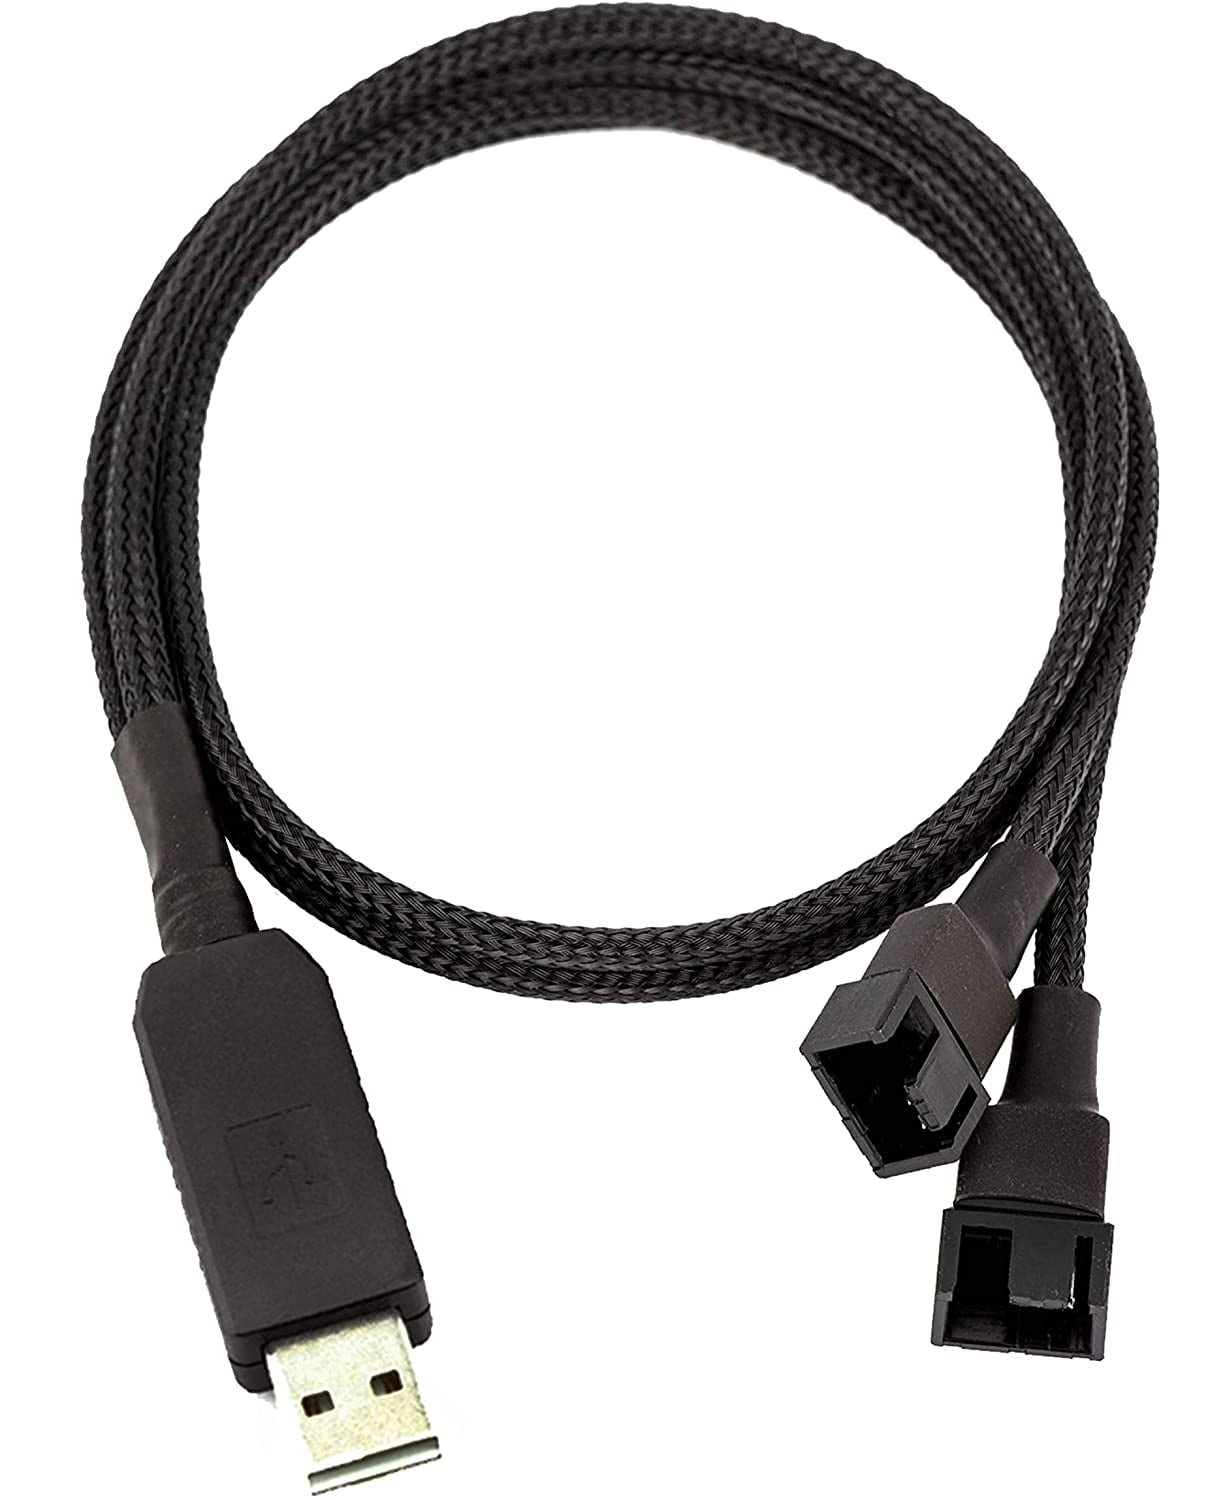 USB 12V to 4 Pin or 3 Pin PC Fan Sleeved Adapter Cable 25 Inches - Walmart.com